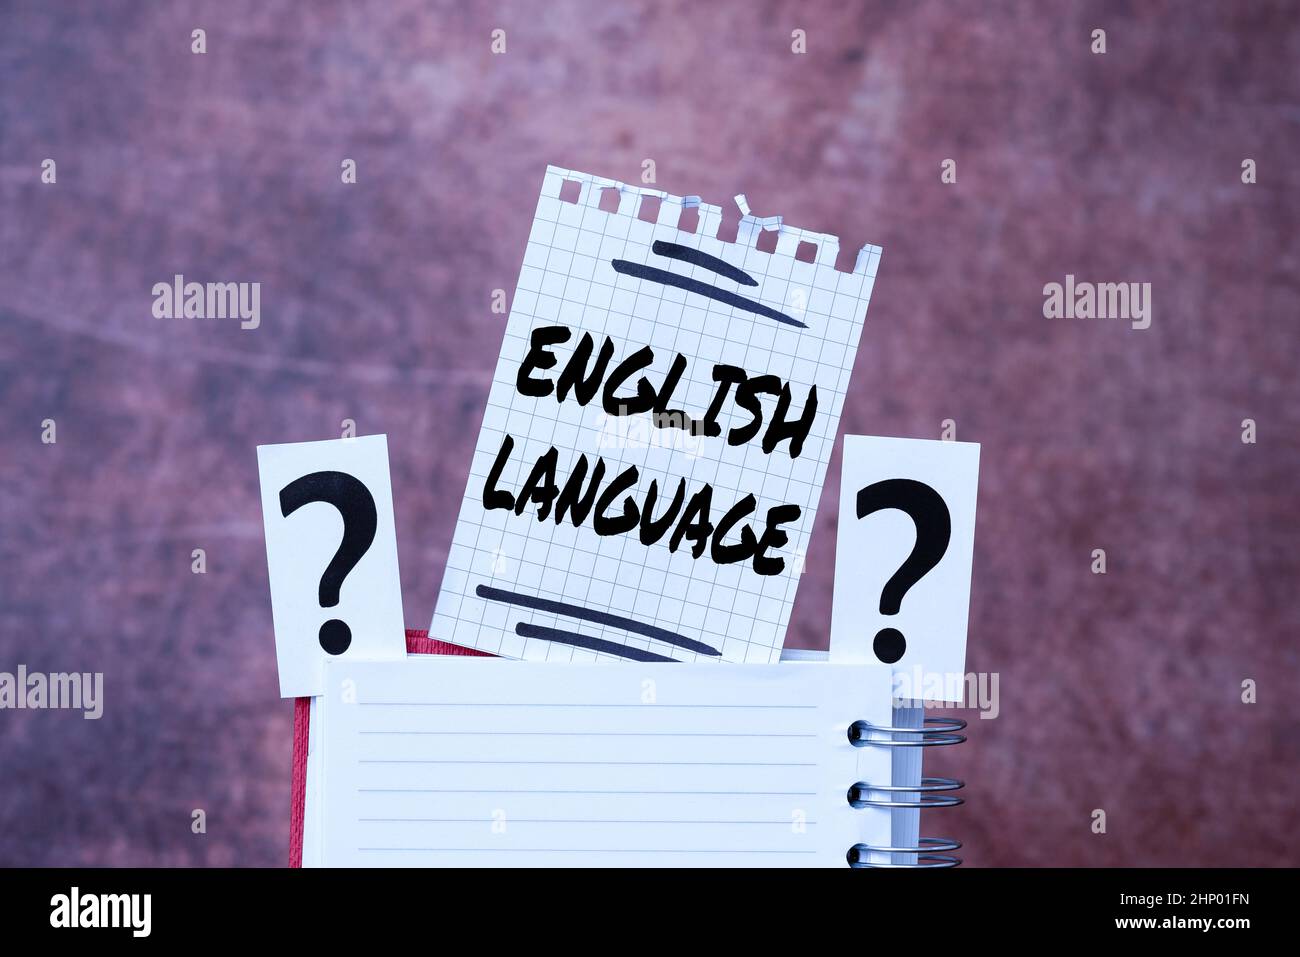 Hand writing sign English Language, Internet Concept third spoken native lang in world after Chinese and Spanish Brainstorming The New Idea Of Solutio Stock Photo